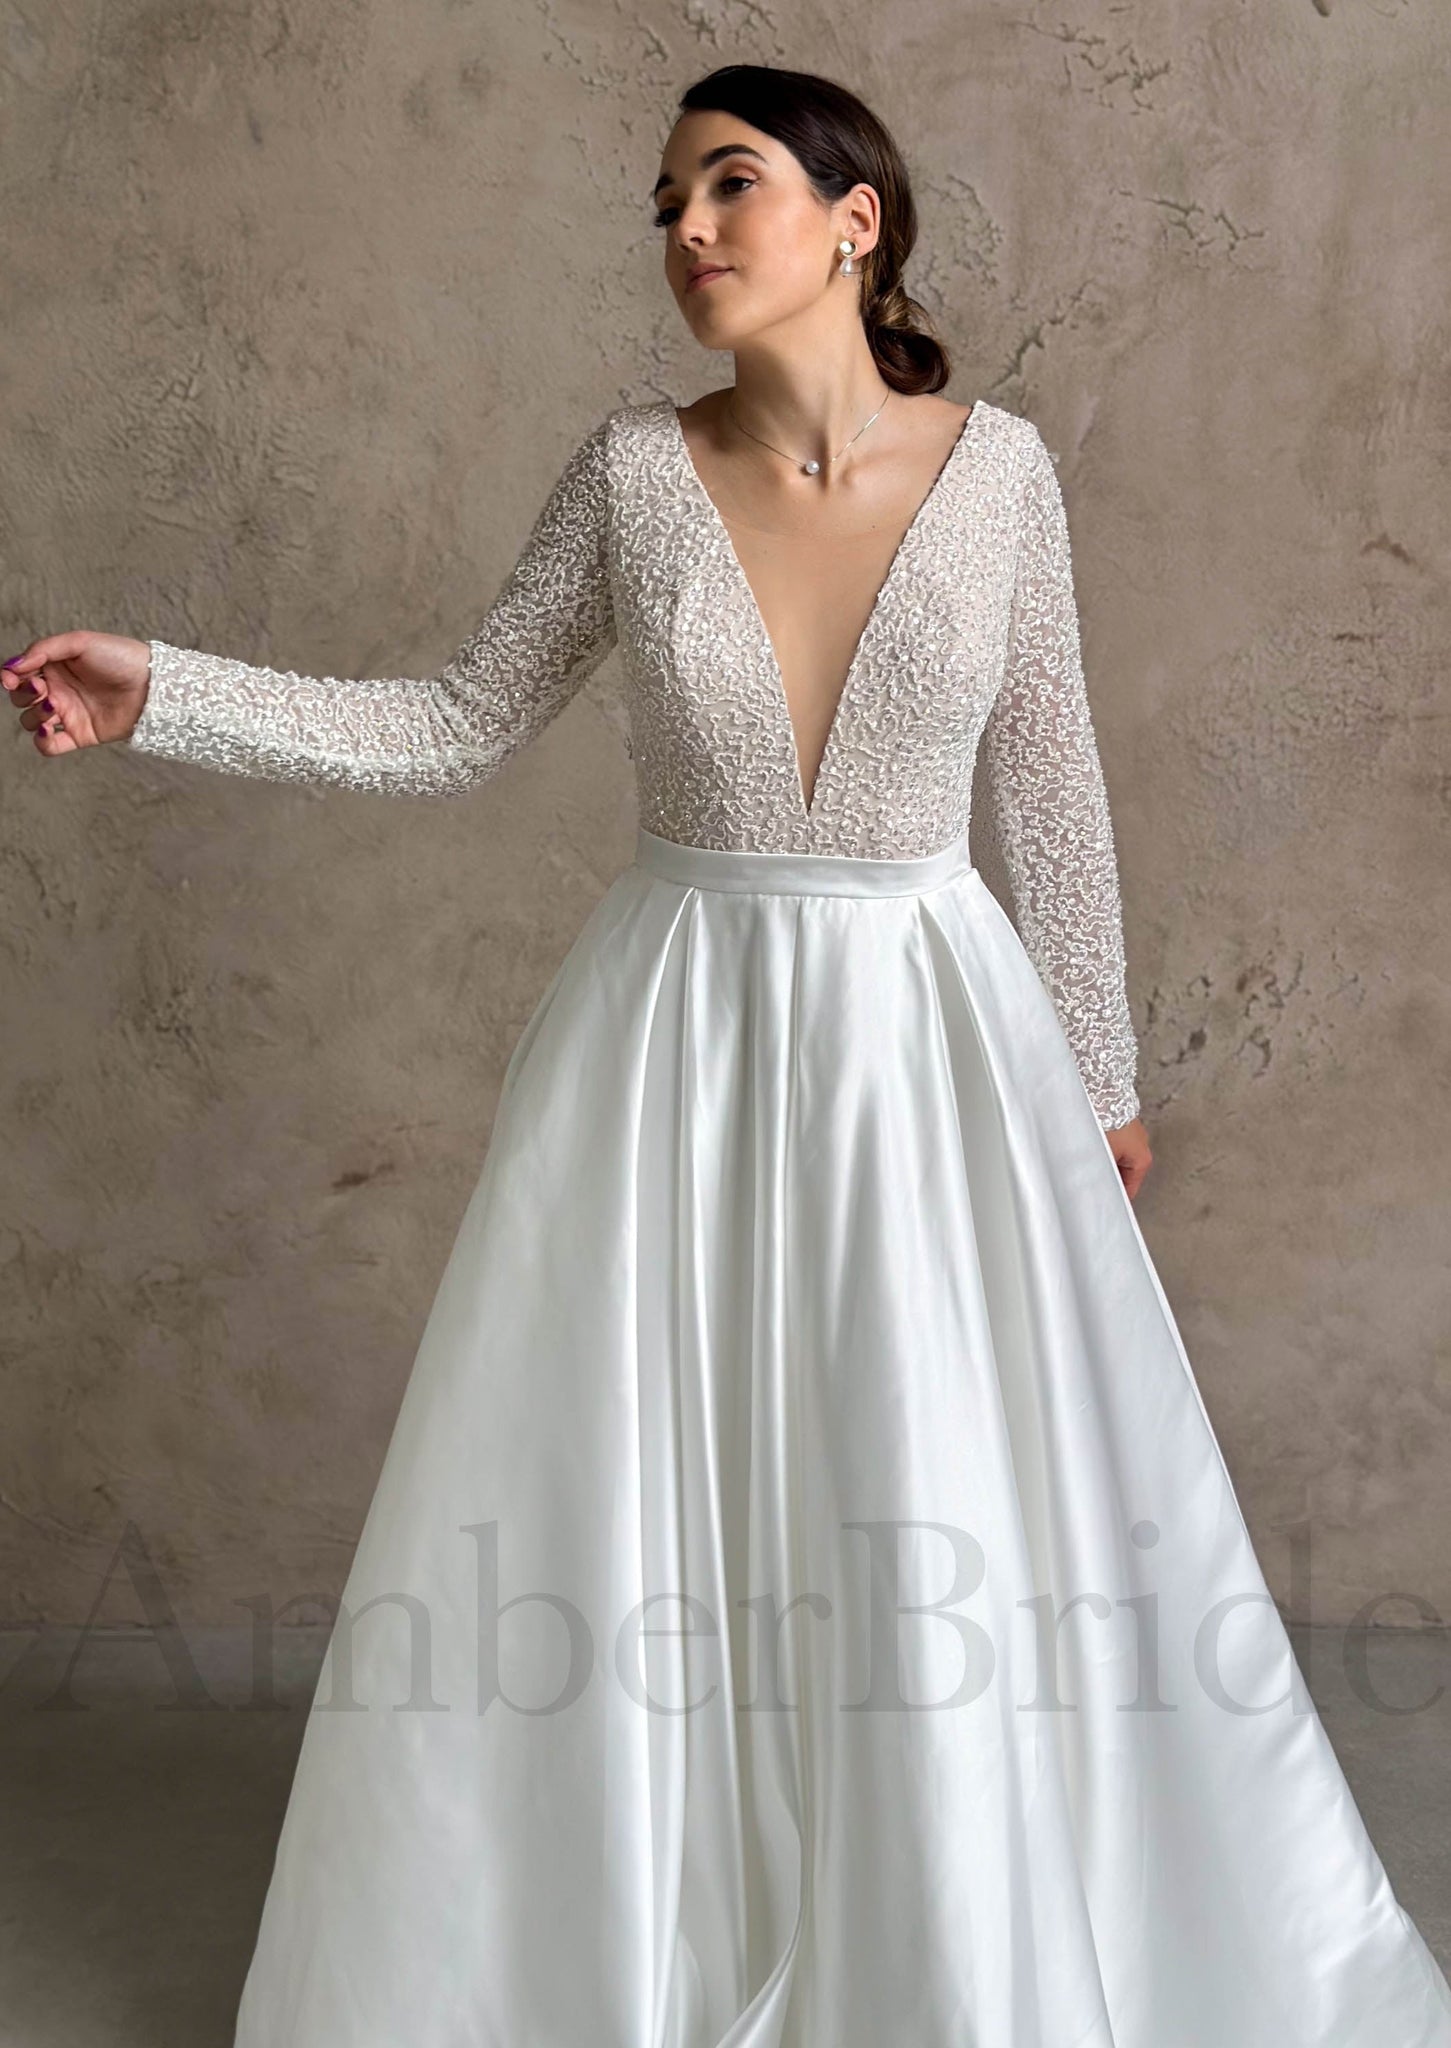 Exclusive A-Line Wedding Dress with Long Sleeve, Deep V-Neck and V-Back